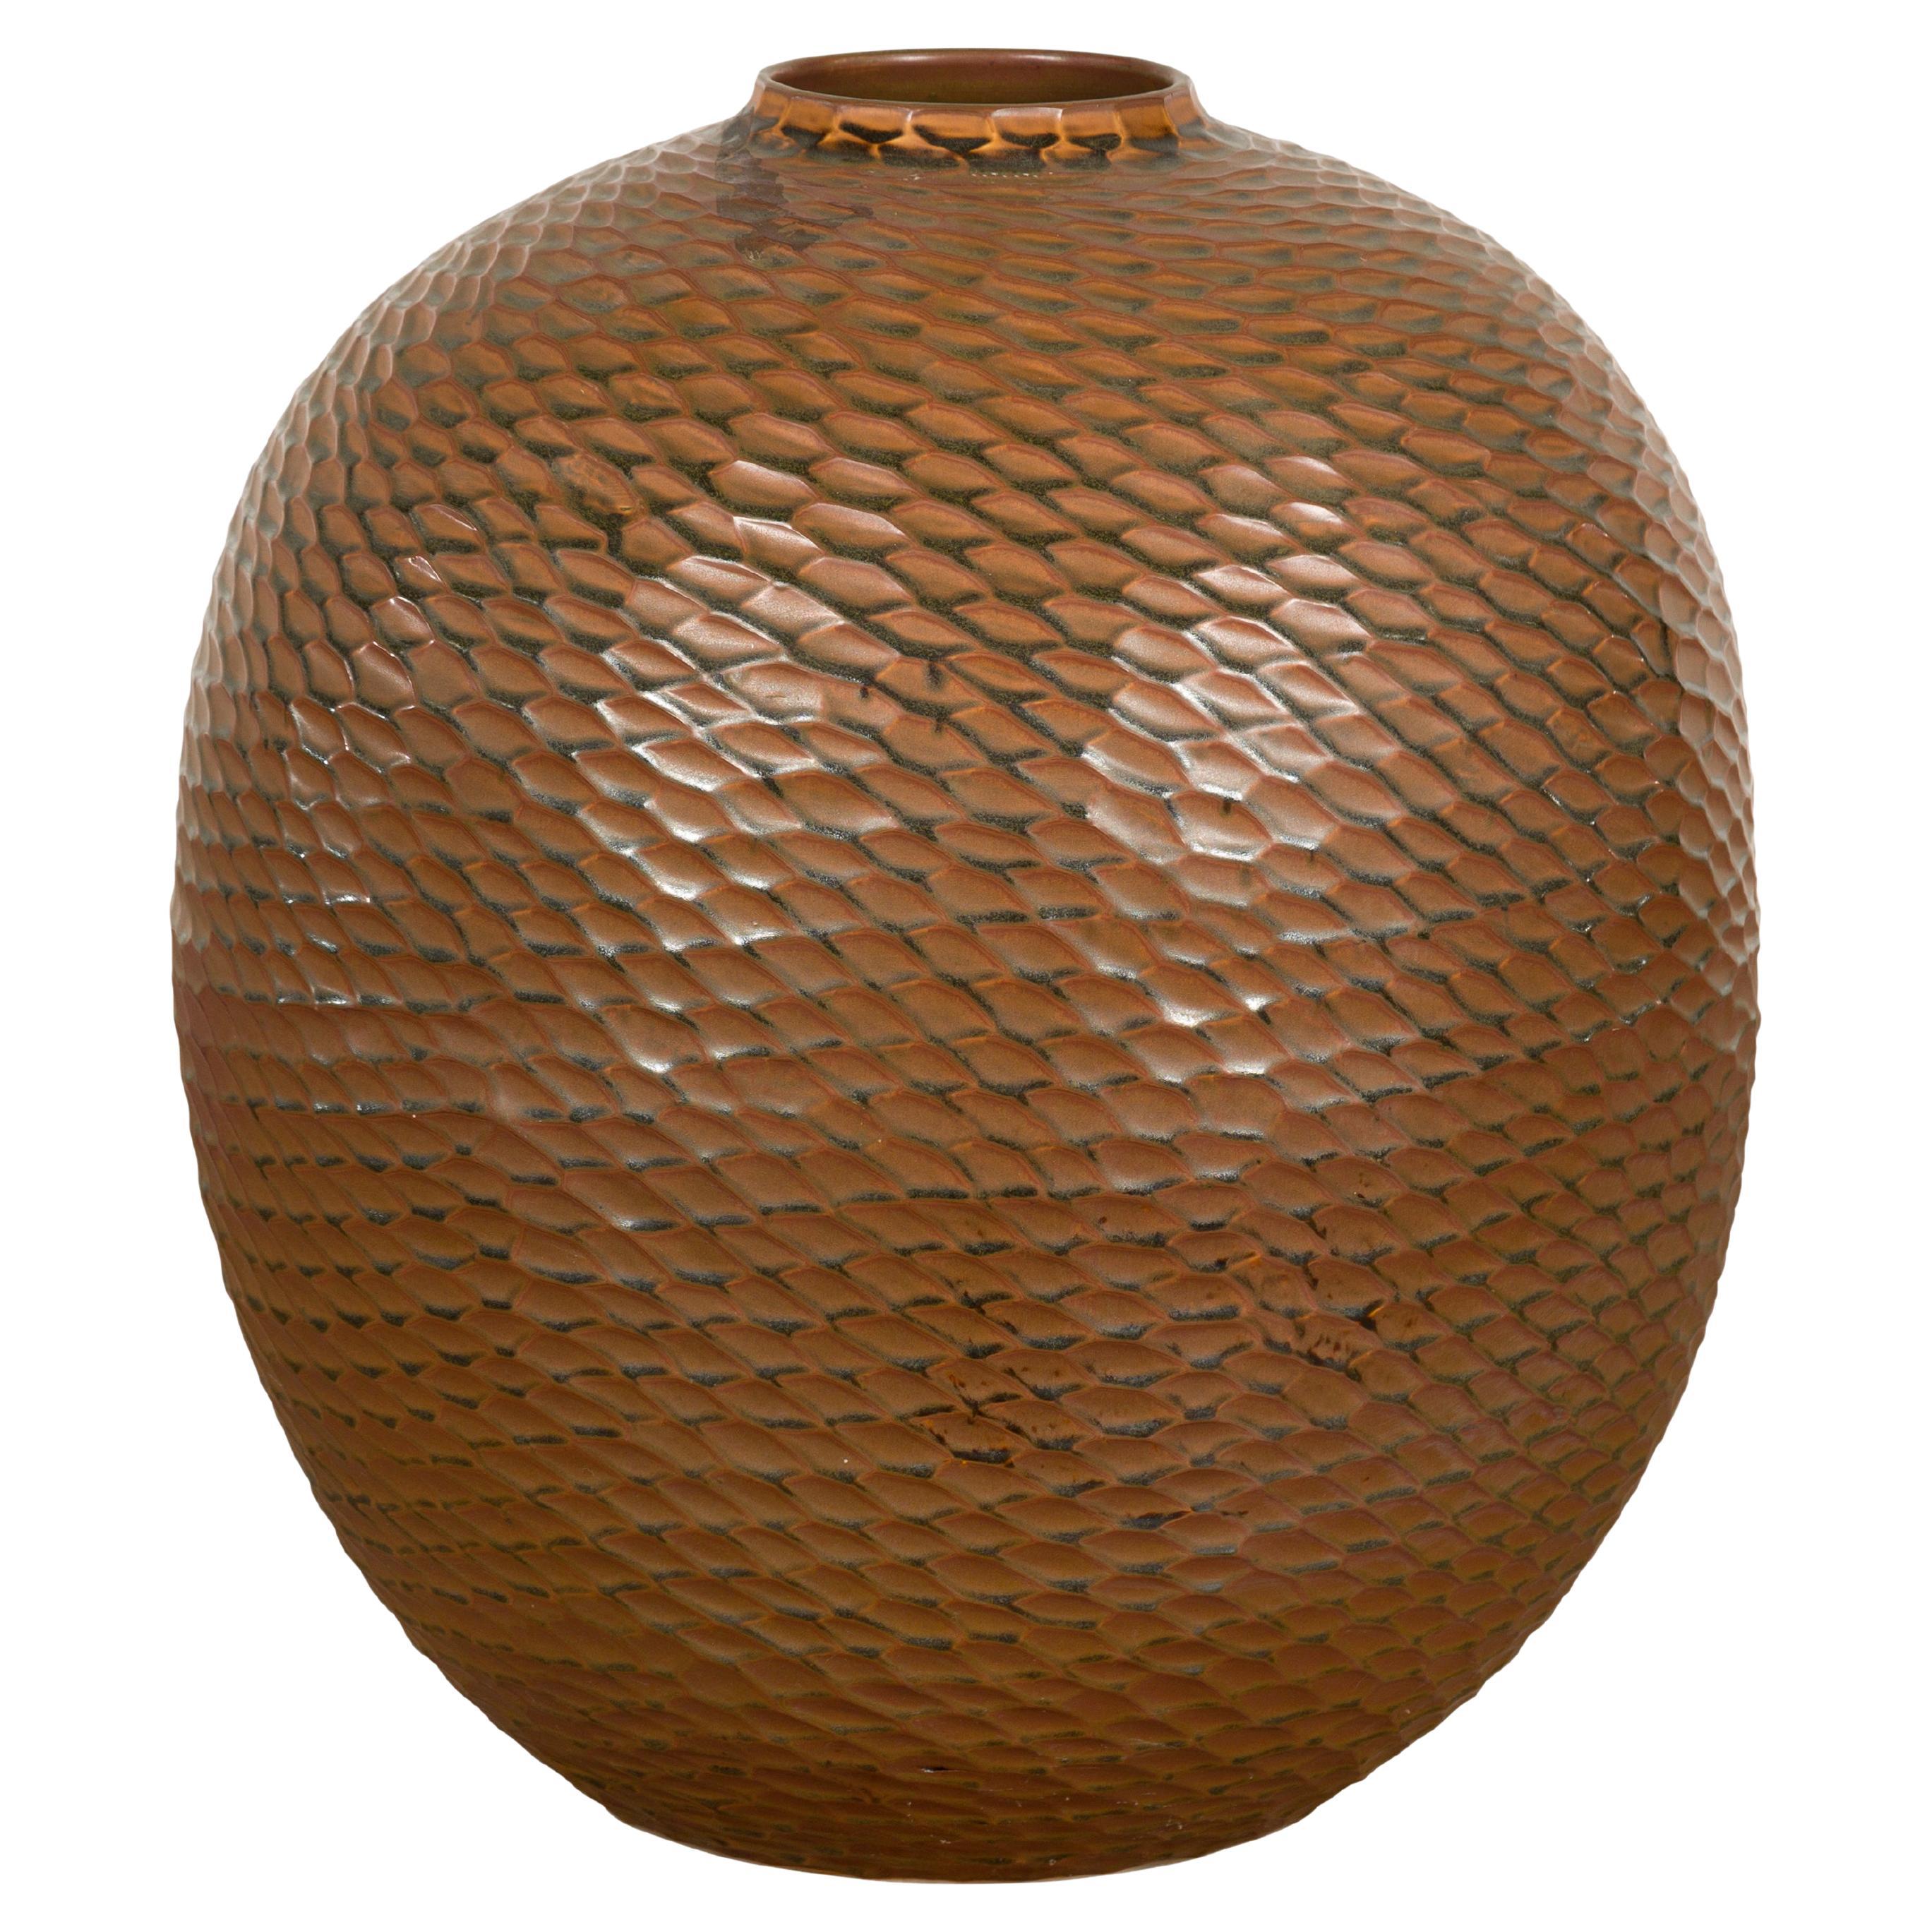 Prem Collection Handcrafted Brown Vase with Textured Honeycomb Style Motifs